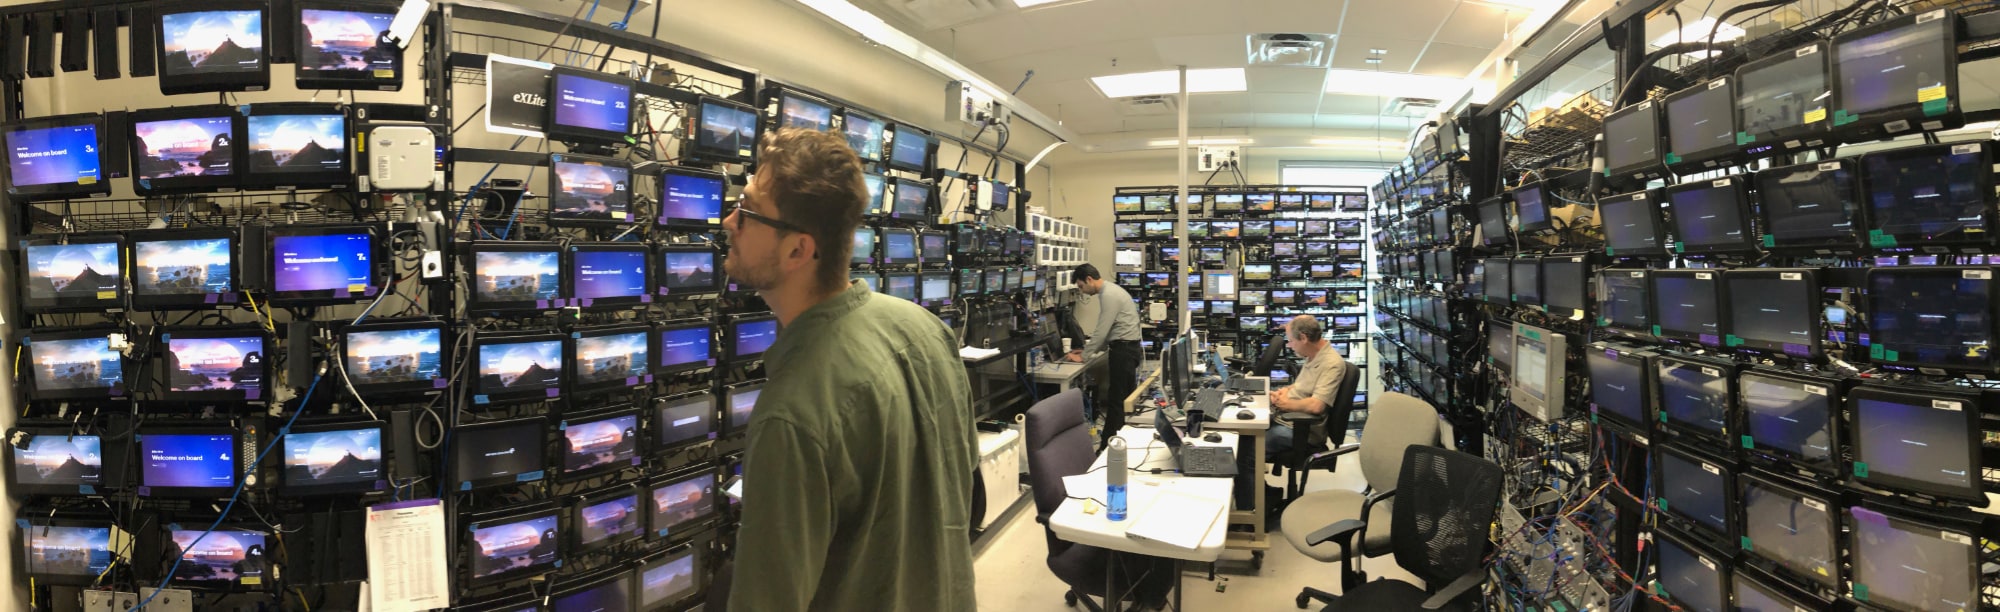 One half of the rack rooms test hardware and equipment in Lake Forest, California